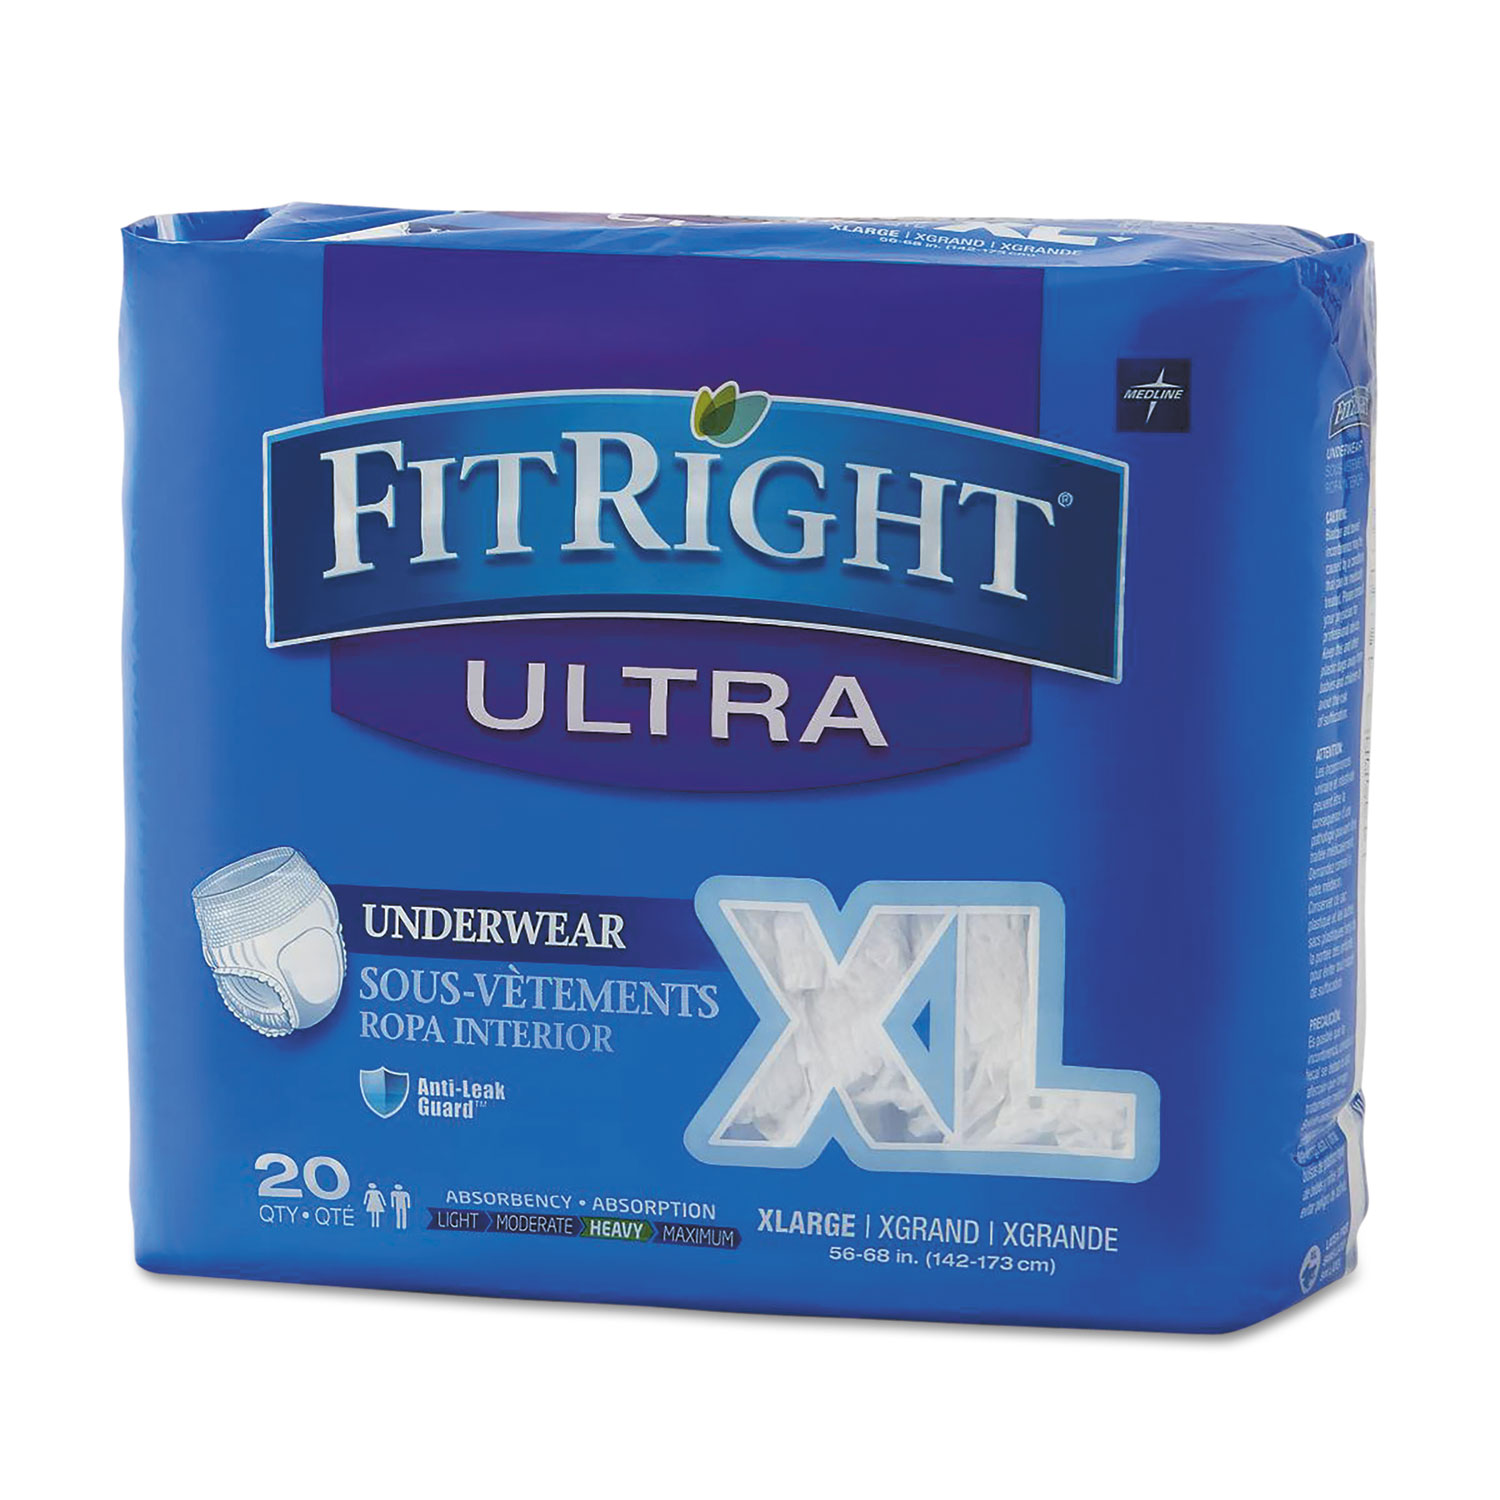  Medline FIT23600A FitRight Ultra Protective Underwear, X-Large, 56 to 68 Waist, 20/Pack (MIIFIT23600A) 